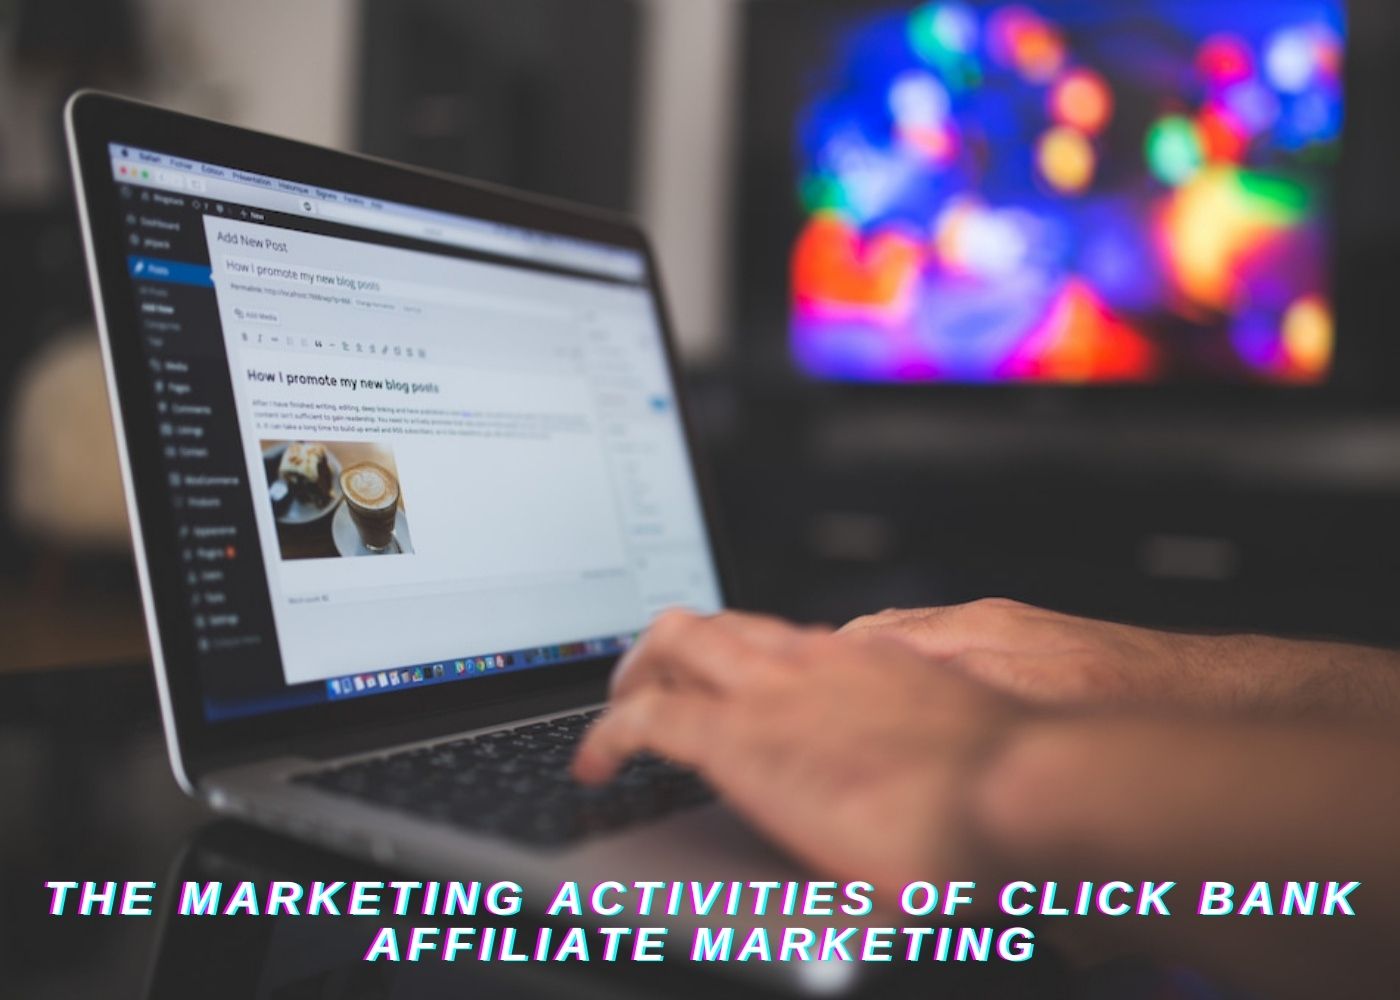 Click bank affiliate marketing Series 3: The marketing activities of Click bank affiliate marketing